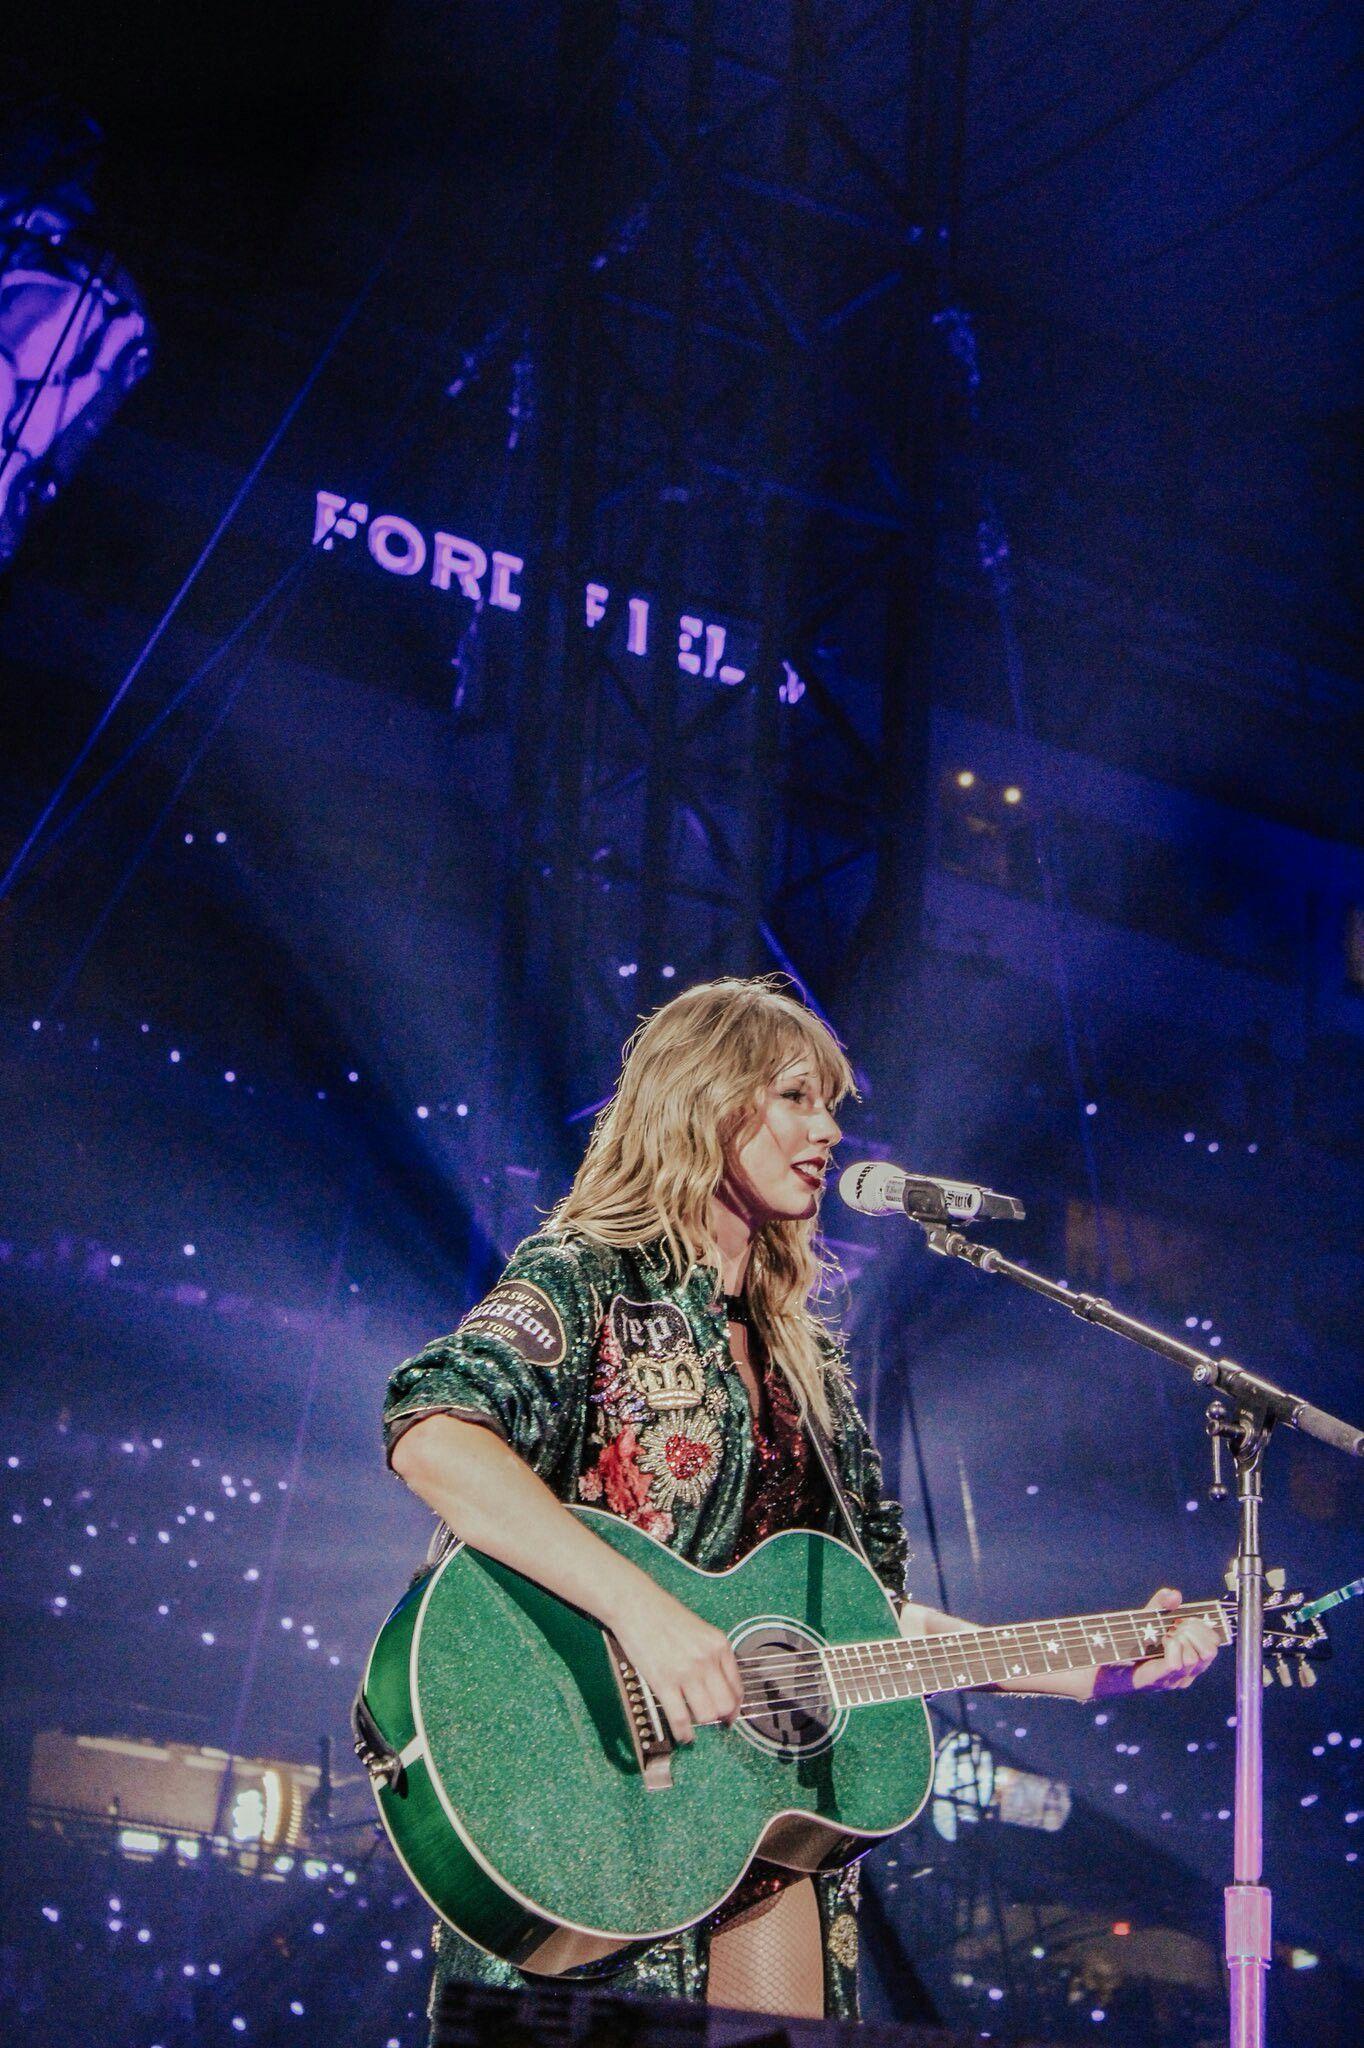 Taylor Swift Concert Wallpapers Top Free Taylor Swift Concert Backgrounds Wallpaperaccess